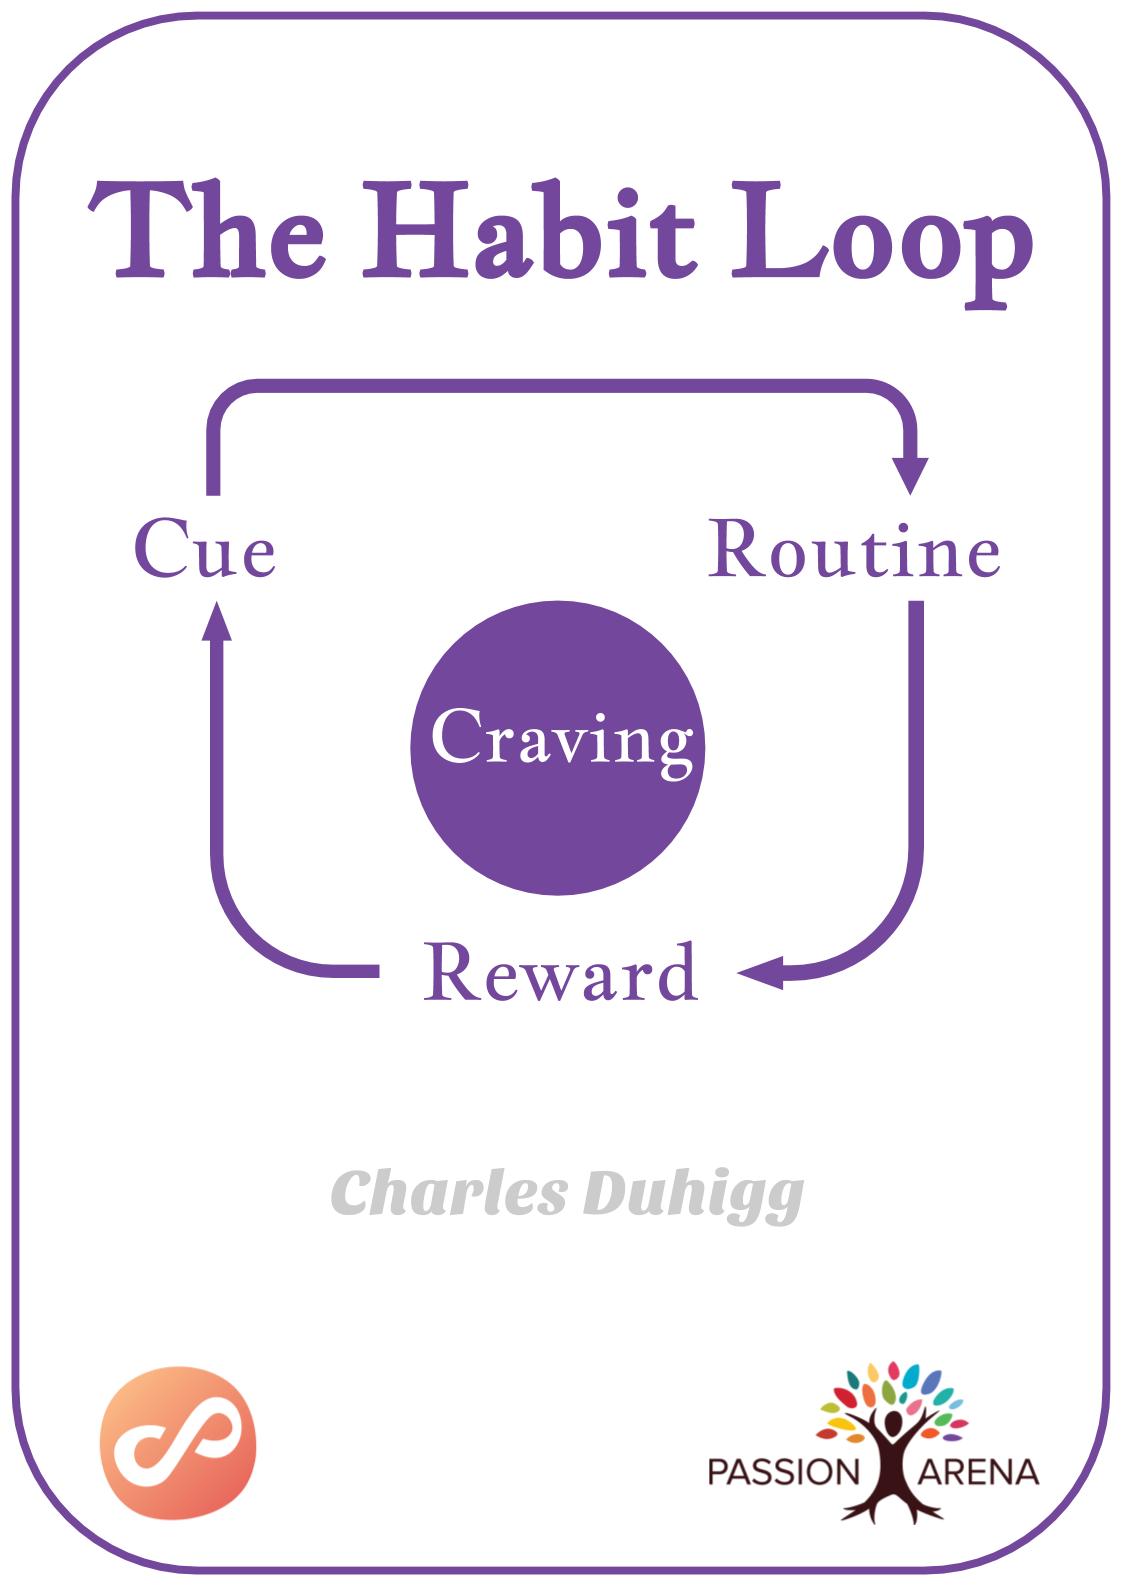 Intro-2-24. How can you change a bad habit?